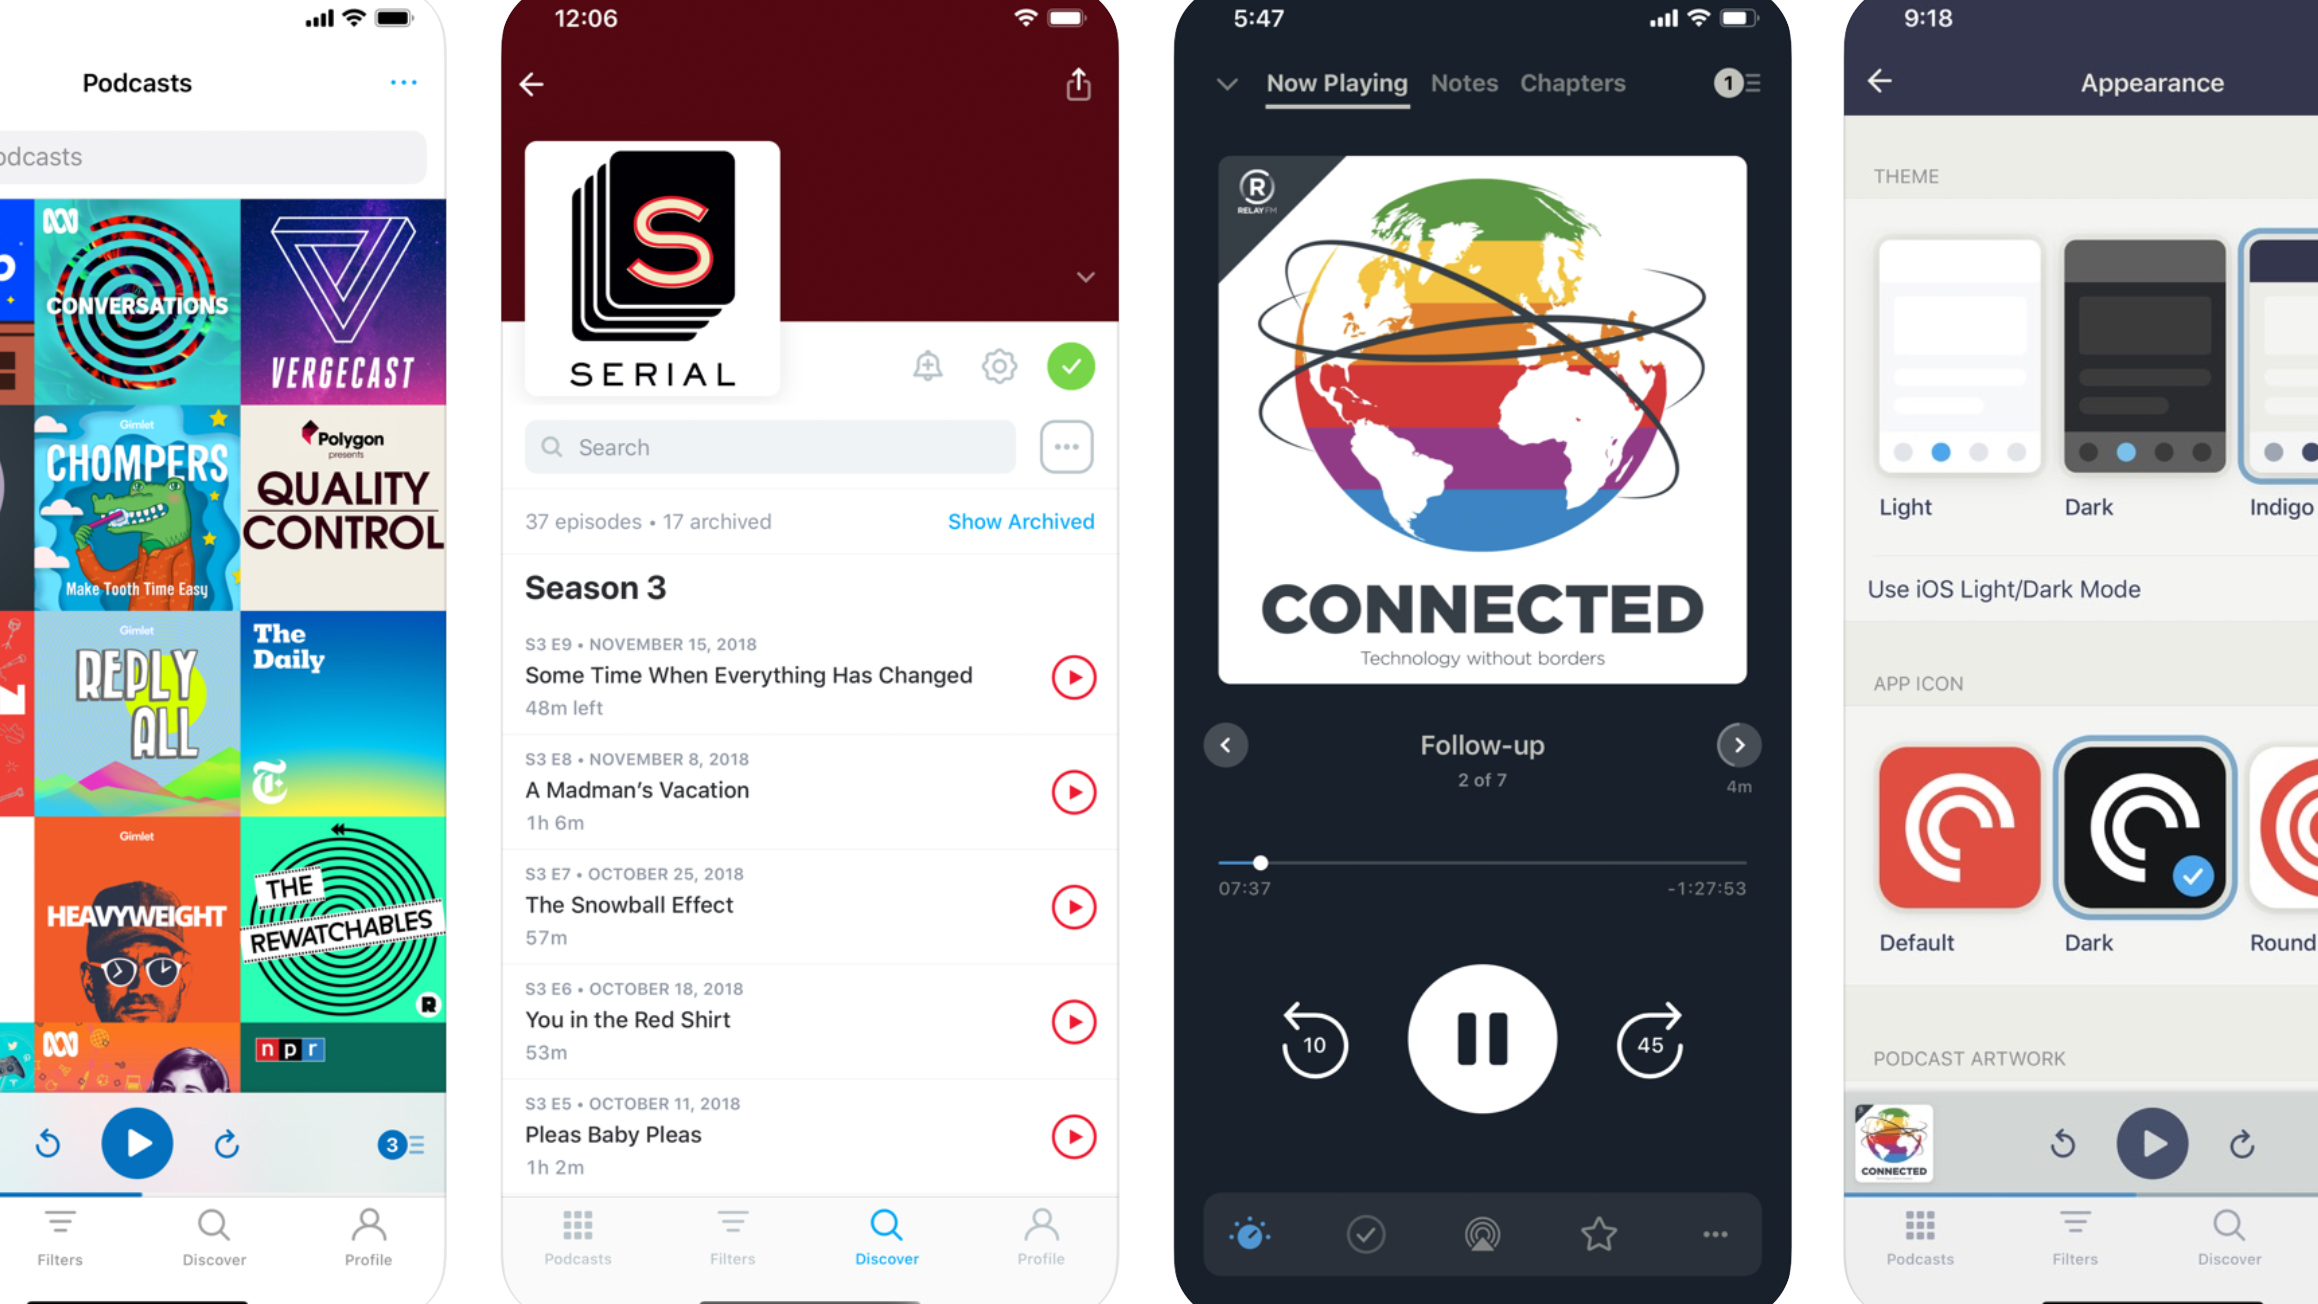 podcasts it wrong app pocket casts